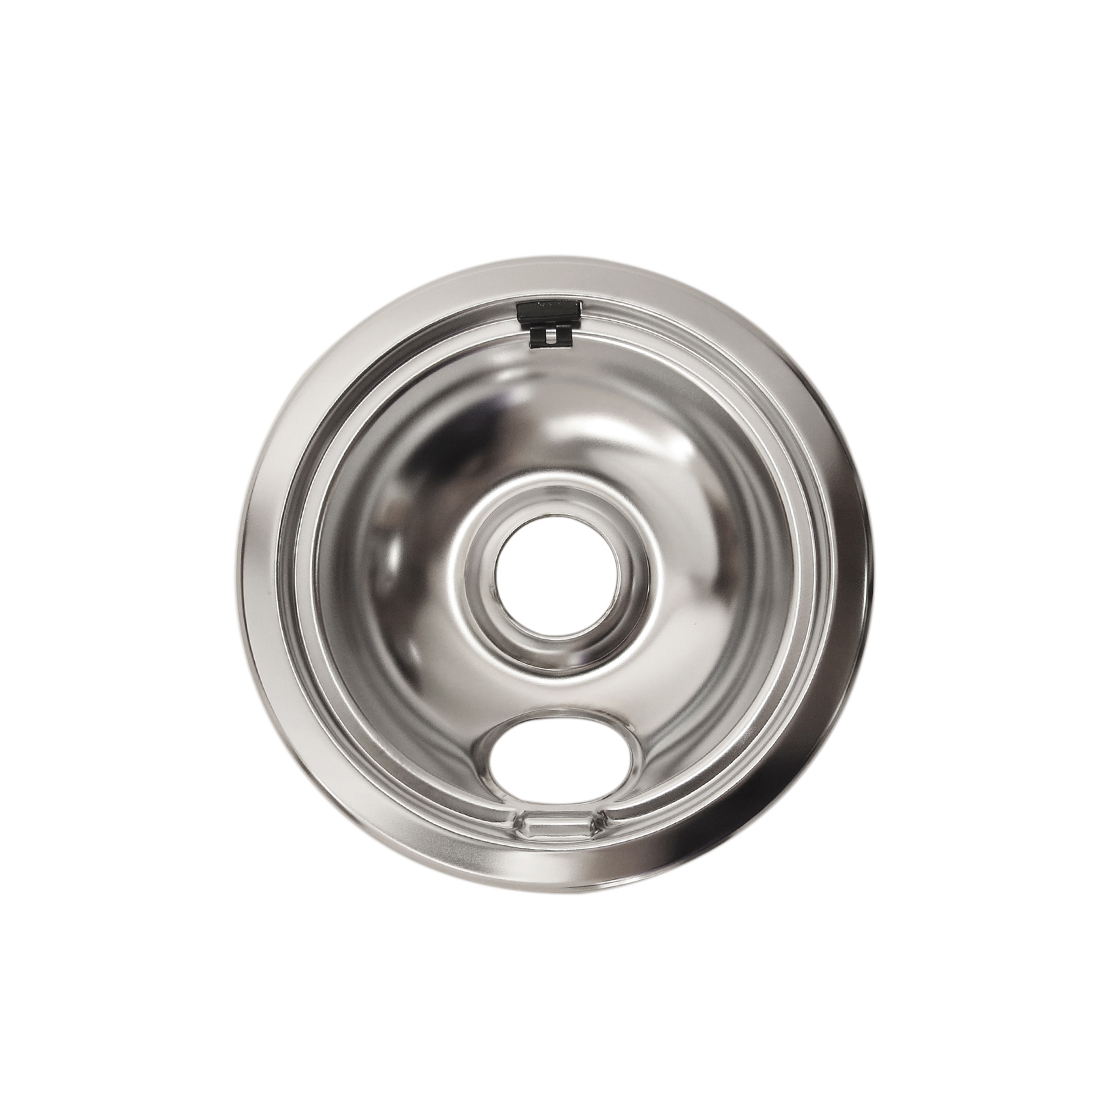 https://www.genuinereplacementparts.com/images/appliance_parts/tappan-teo356bcdc-6-inch-burner-small-drip-pan-genuine-oem.jpg